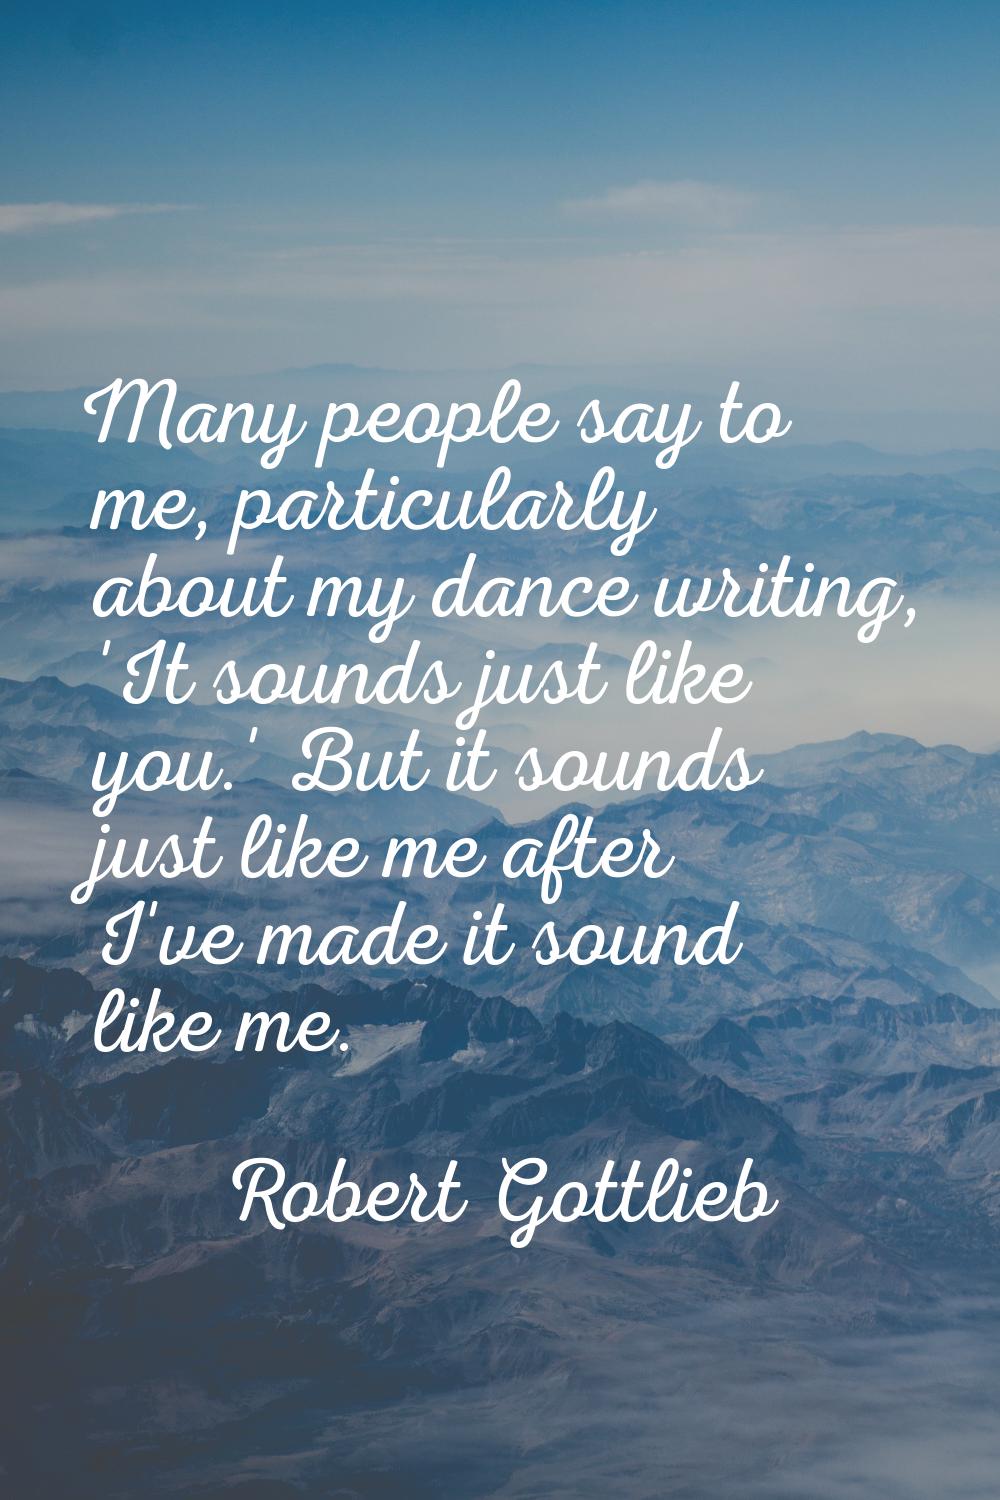 Many people say to me, particularly about my dance writing, 'It sounds just like you.' But it sound